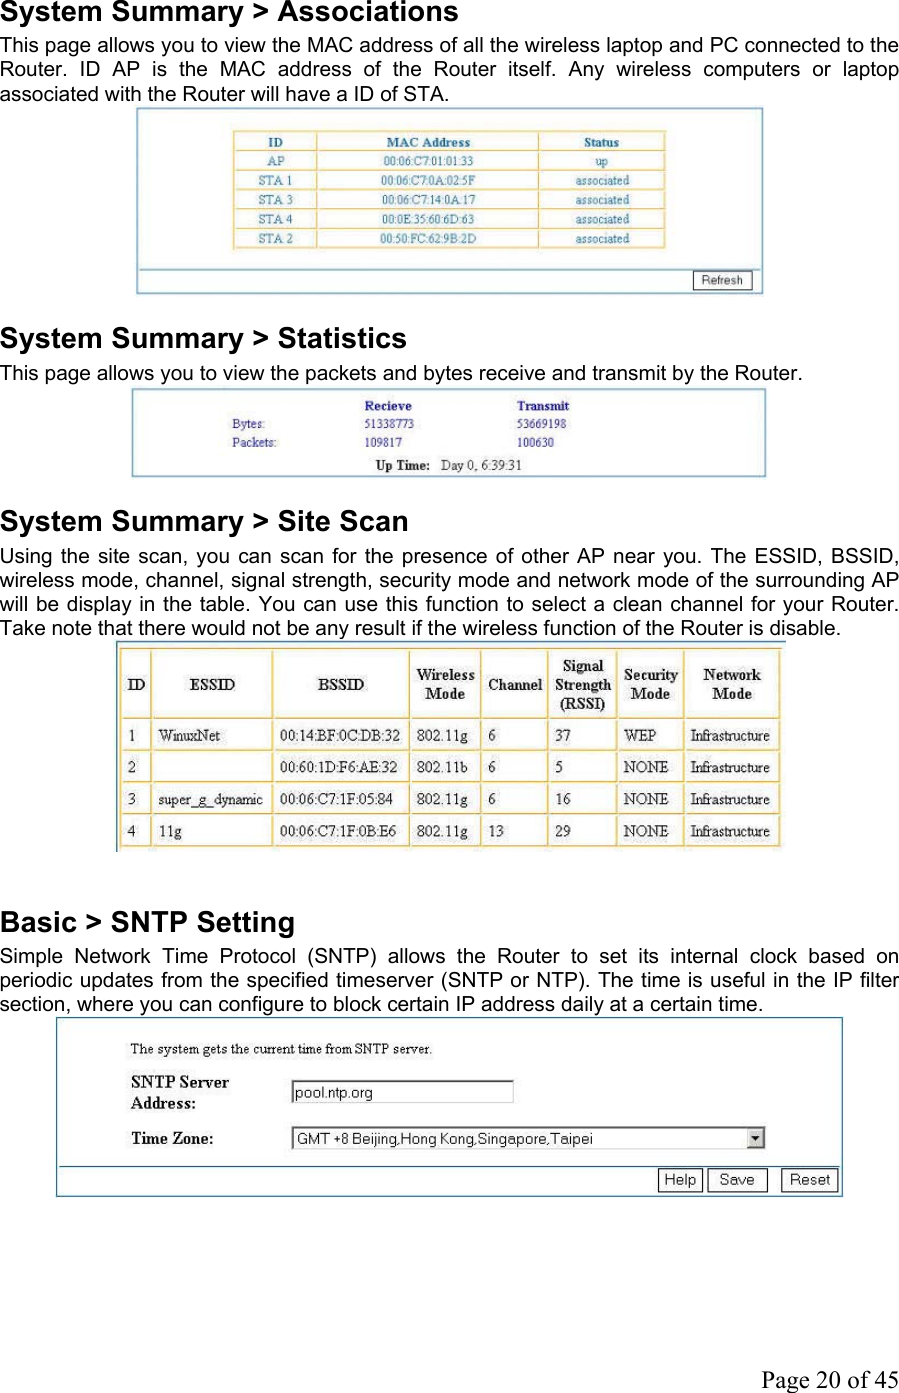 System Summary &gt; Associations This page allows you to view the MAC address of all the wireless laptop and PC connected to the Router. ID AP is the MAC address of the Router itself. Any wireless computers or laptop associated with the Router will have a ID of STA.  System Summary &gt; Statistics This page allows you to view the packets and bytes receive and transmit by the Router.  System Summary &gt; Site Scan Using the site scan, you can scan for the presence of other AP near you. The ESSID, BSSID, wireless mode, channel, signal strength, security mode and network mode of the surrounding AP will be display in the table. You can use this function to select a clean channel for your Router. Take note that there would not be any result if the wireless function of the Router is disable.   Basic &gt; SNTP Setting Simple Network Time Protocol (SNTP) allows the Router to set its internal clock based on periodic updates from the specified timeserver (SNTP or NTP). The time is useful in the IP filter section, where you can configure to block certain IP address daily at a certain time.     Page 20 of 45                    